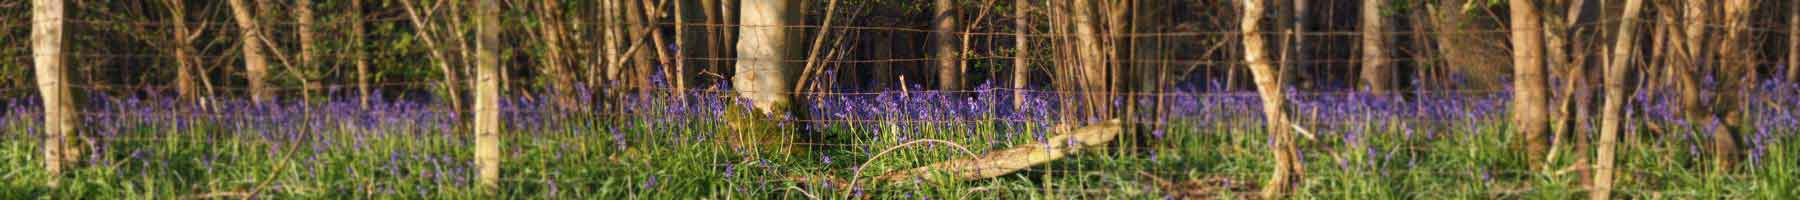 British bluebells in full bloom in a wooded area on a sunny spring day.